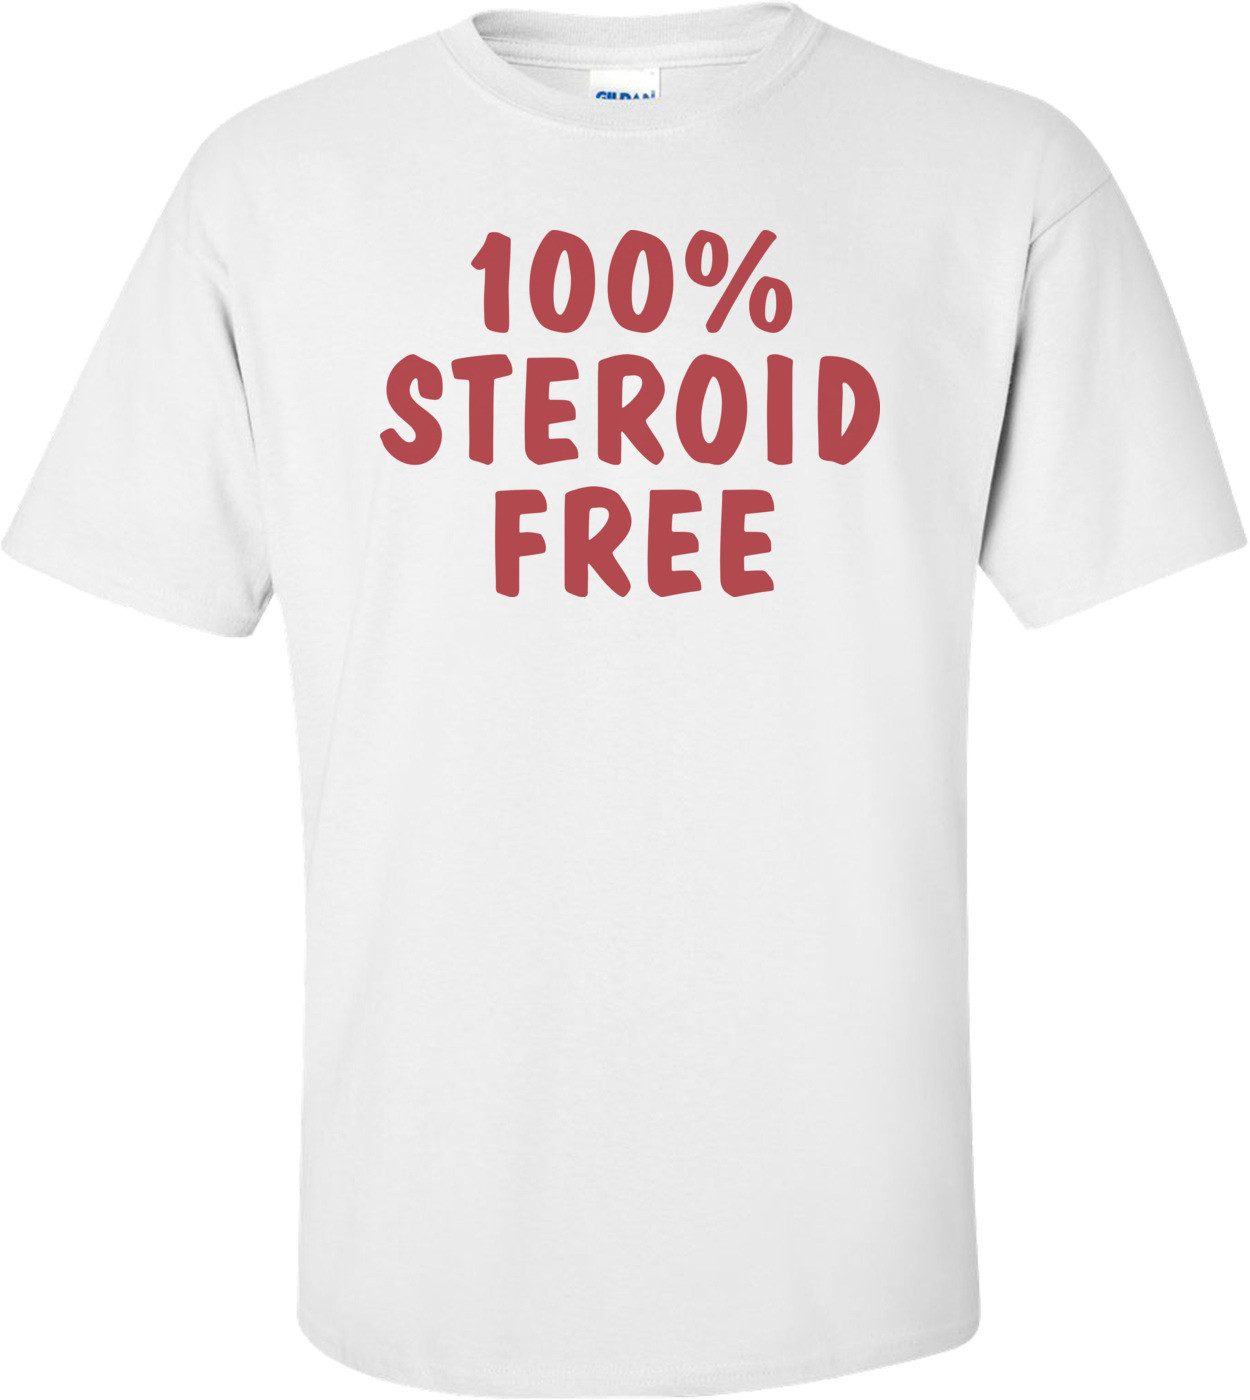 100% Steroid Free